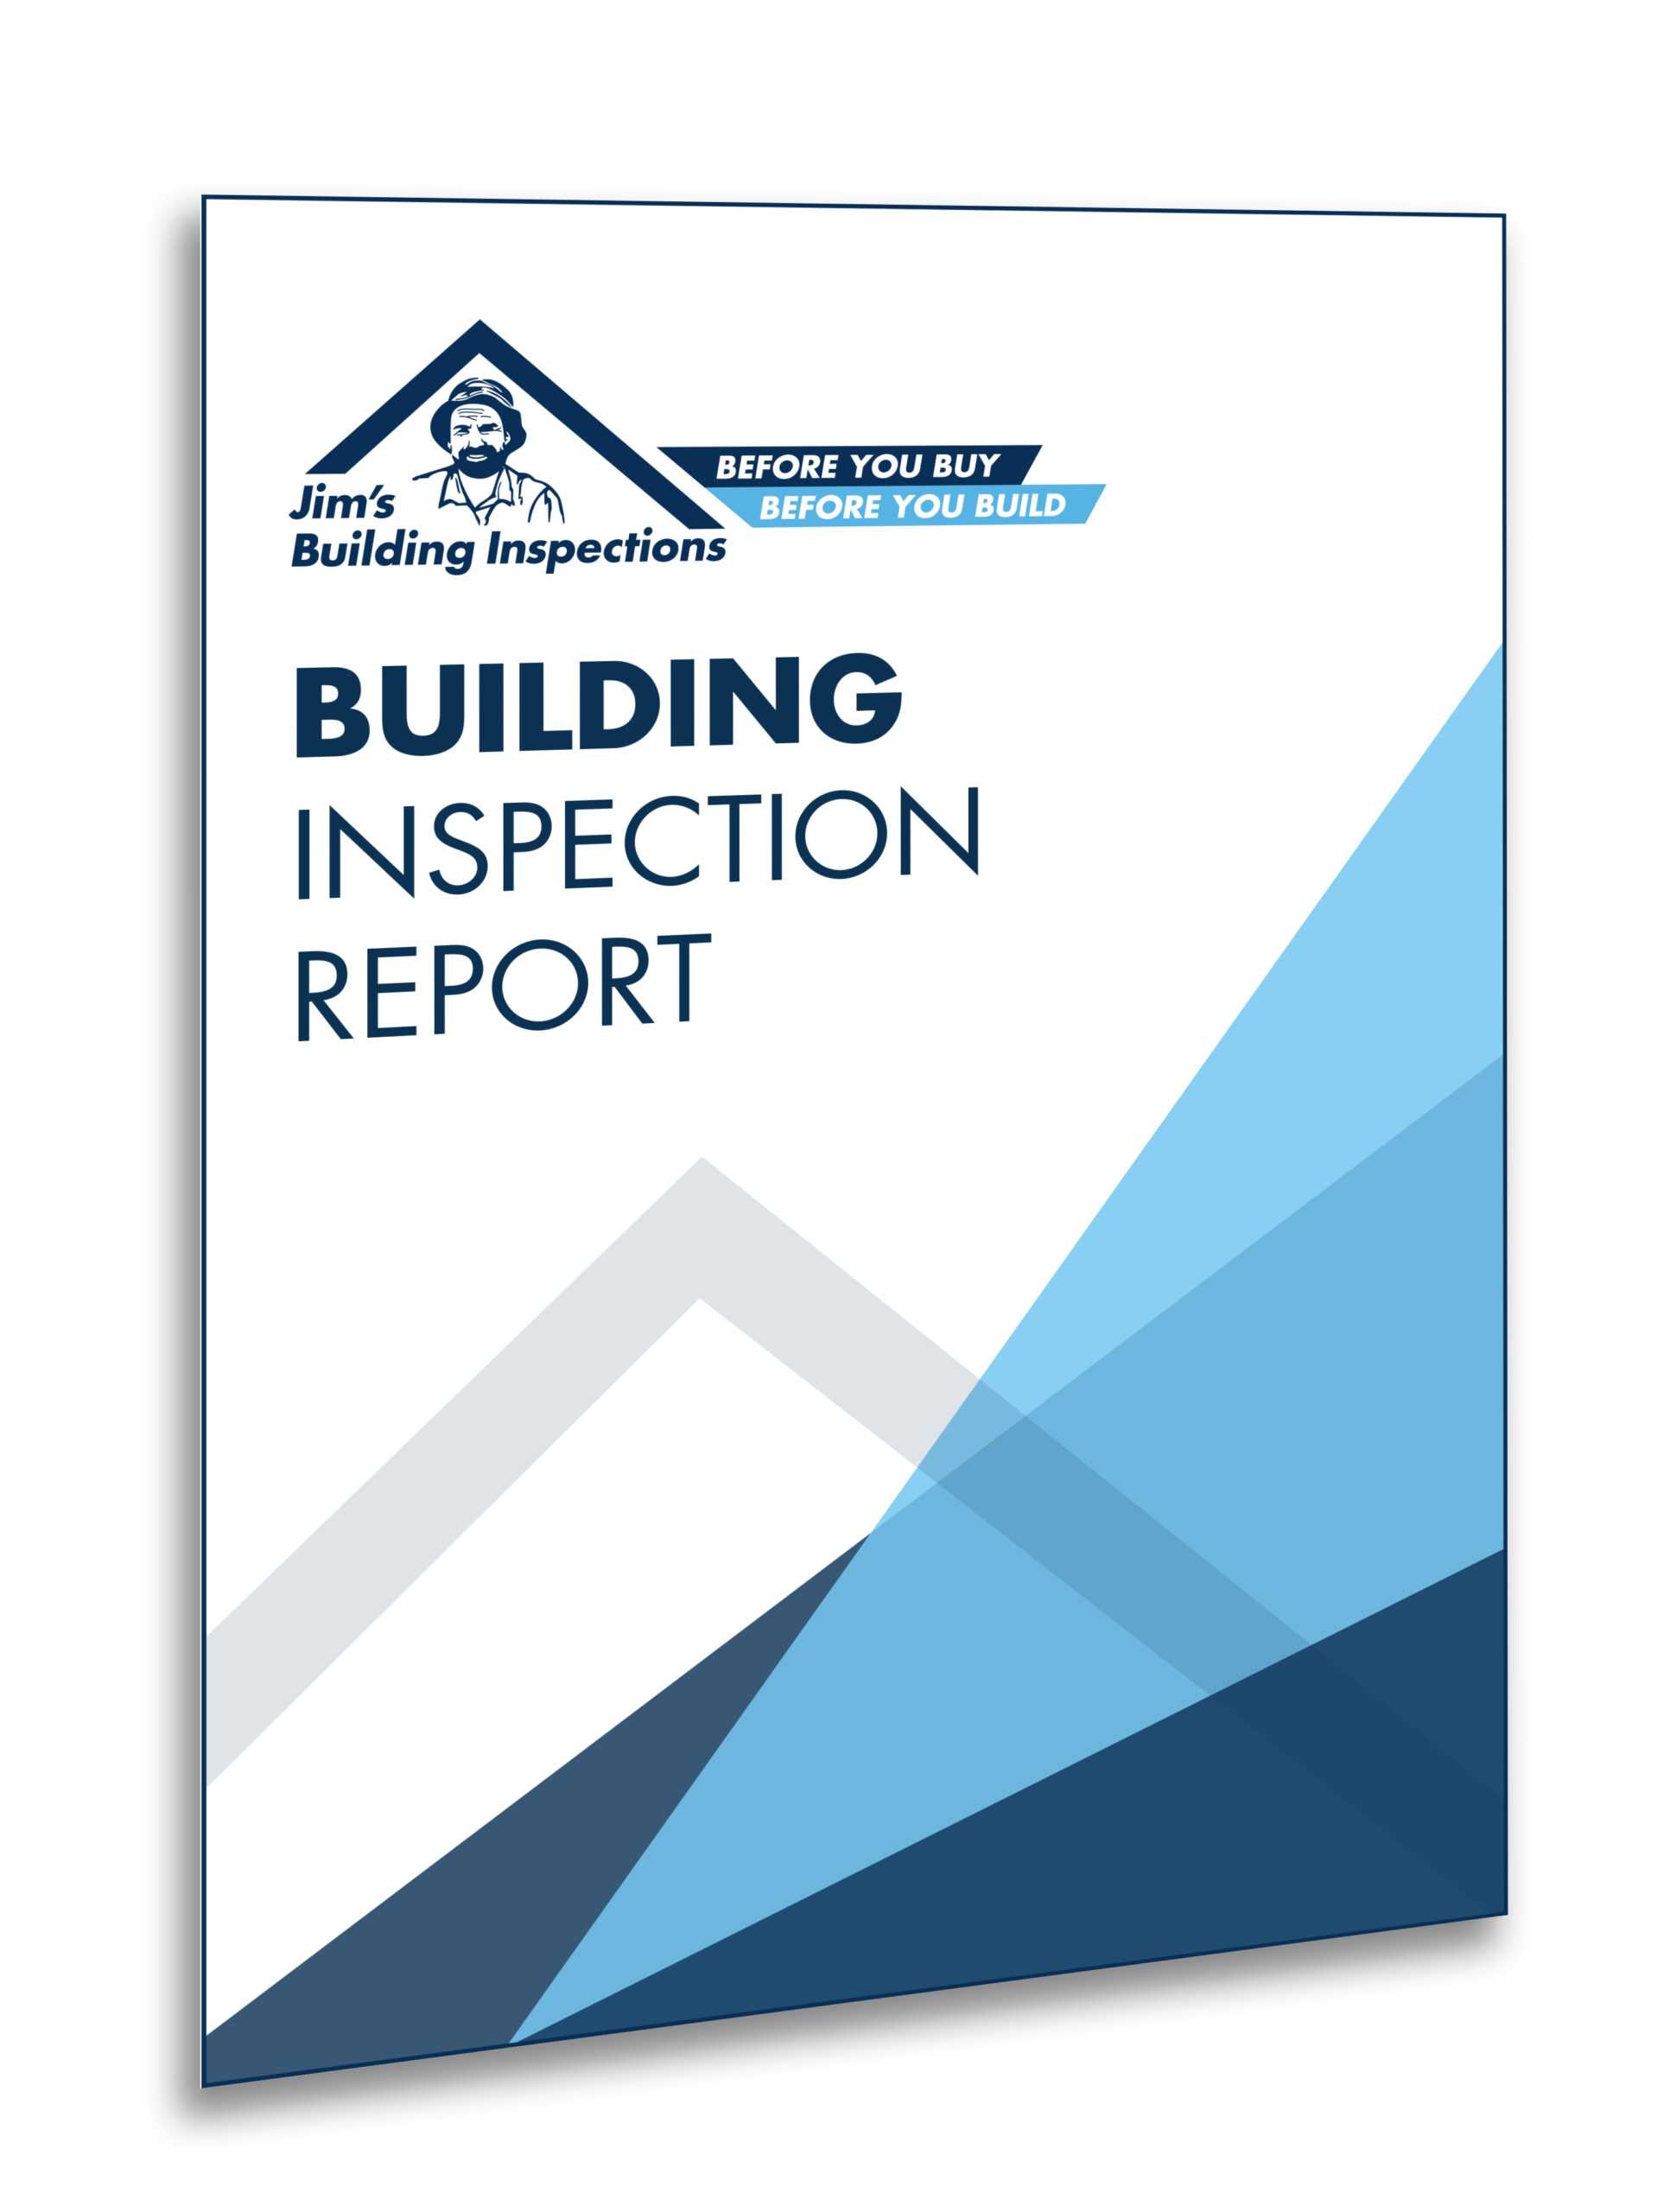 Sample Reports | Jim's Building Inspections Intended For Pre Purchase Building Inspection Report Template